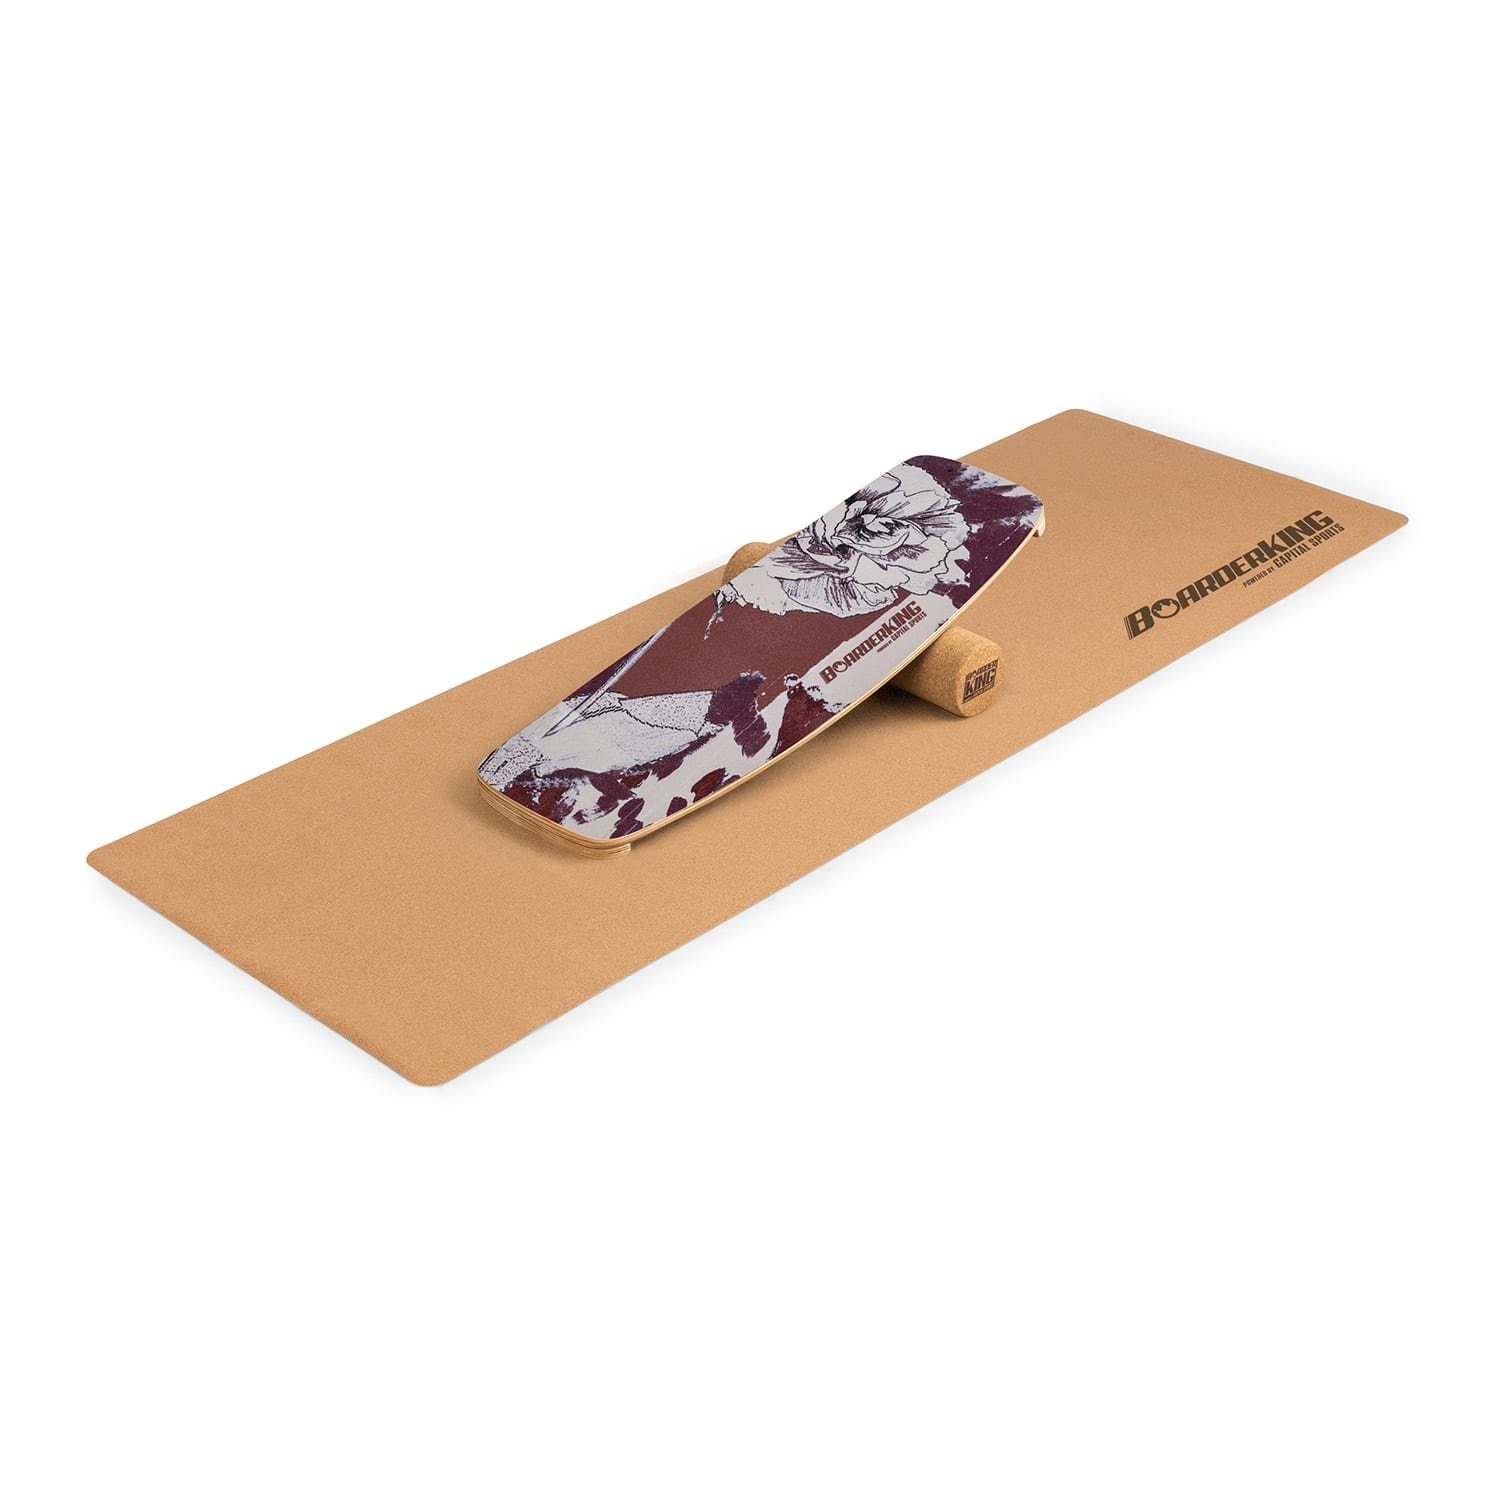 BoarderKING Half Floral Ball Indoorboard Curved